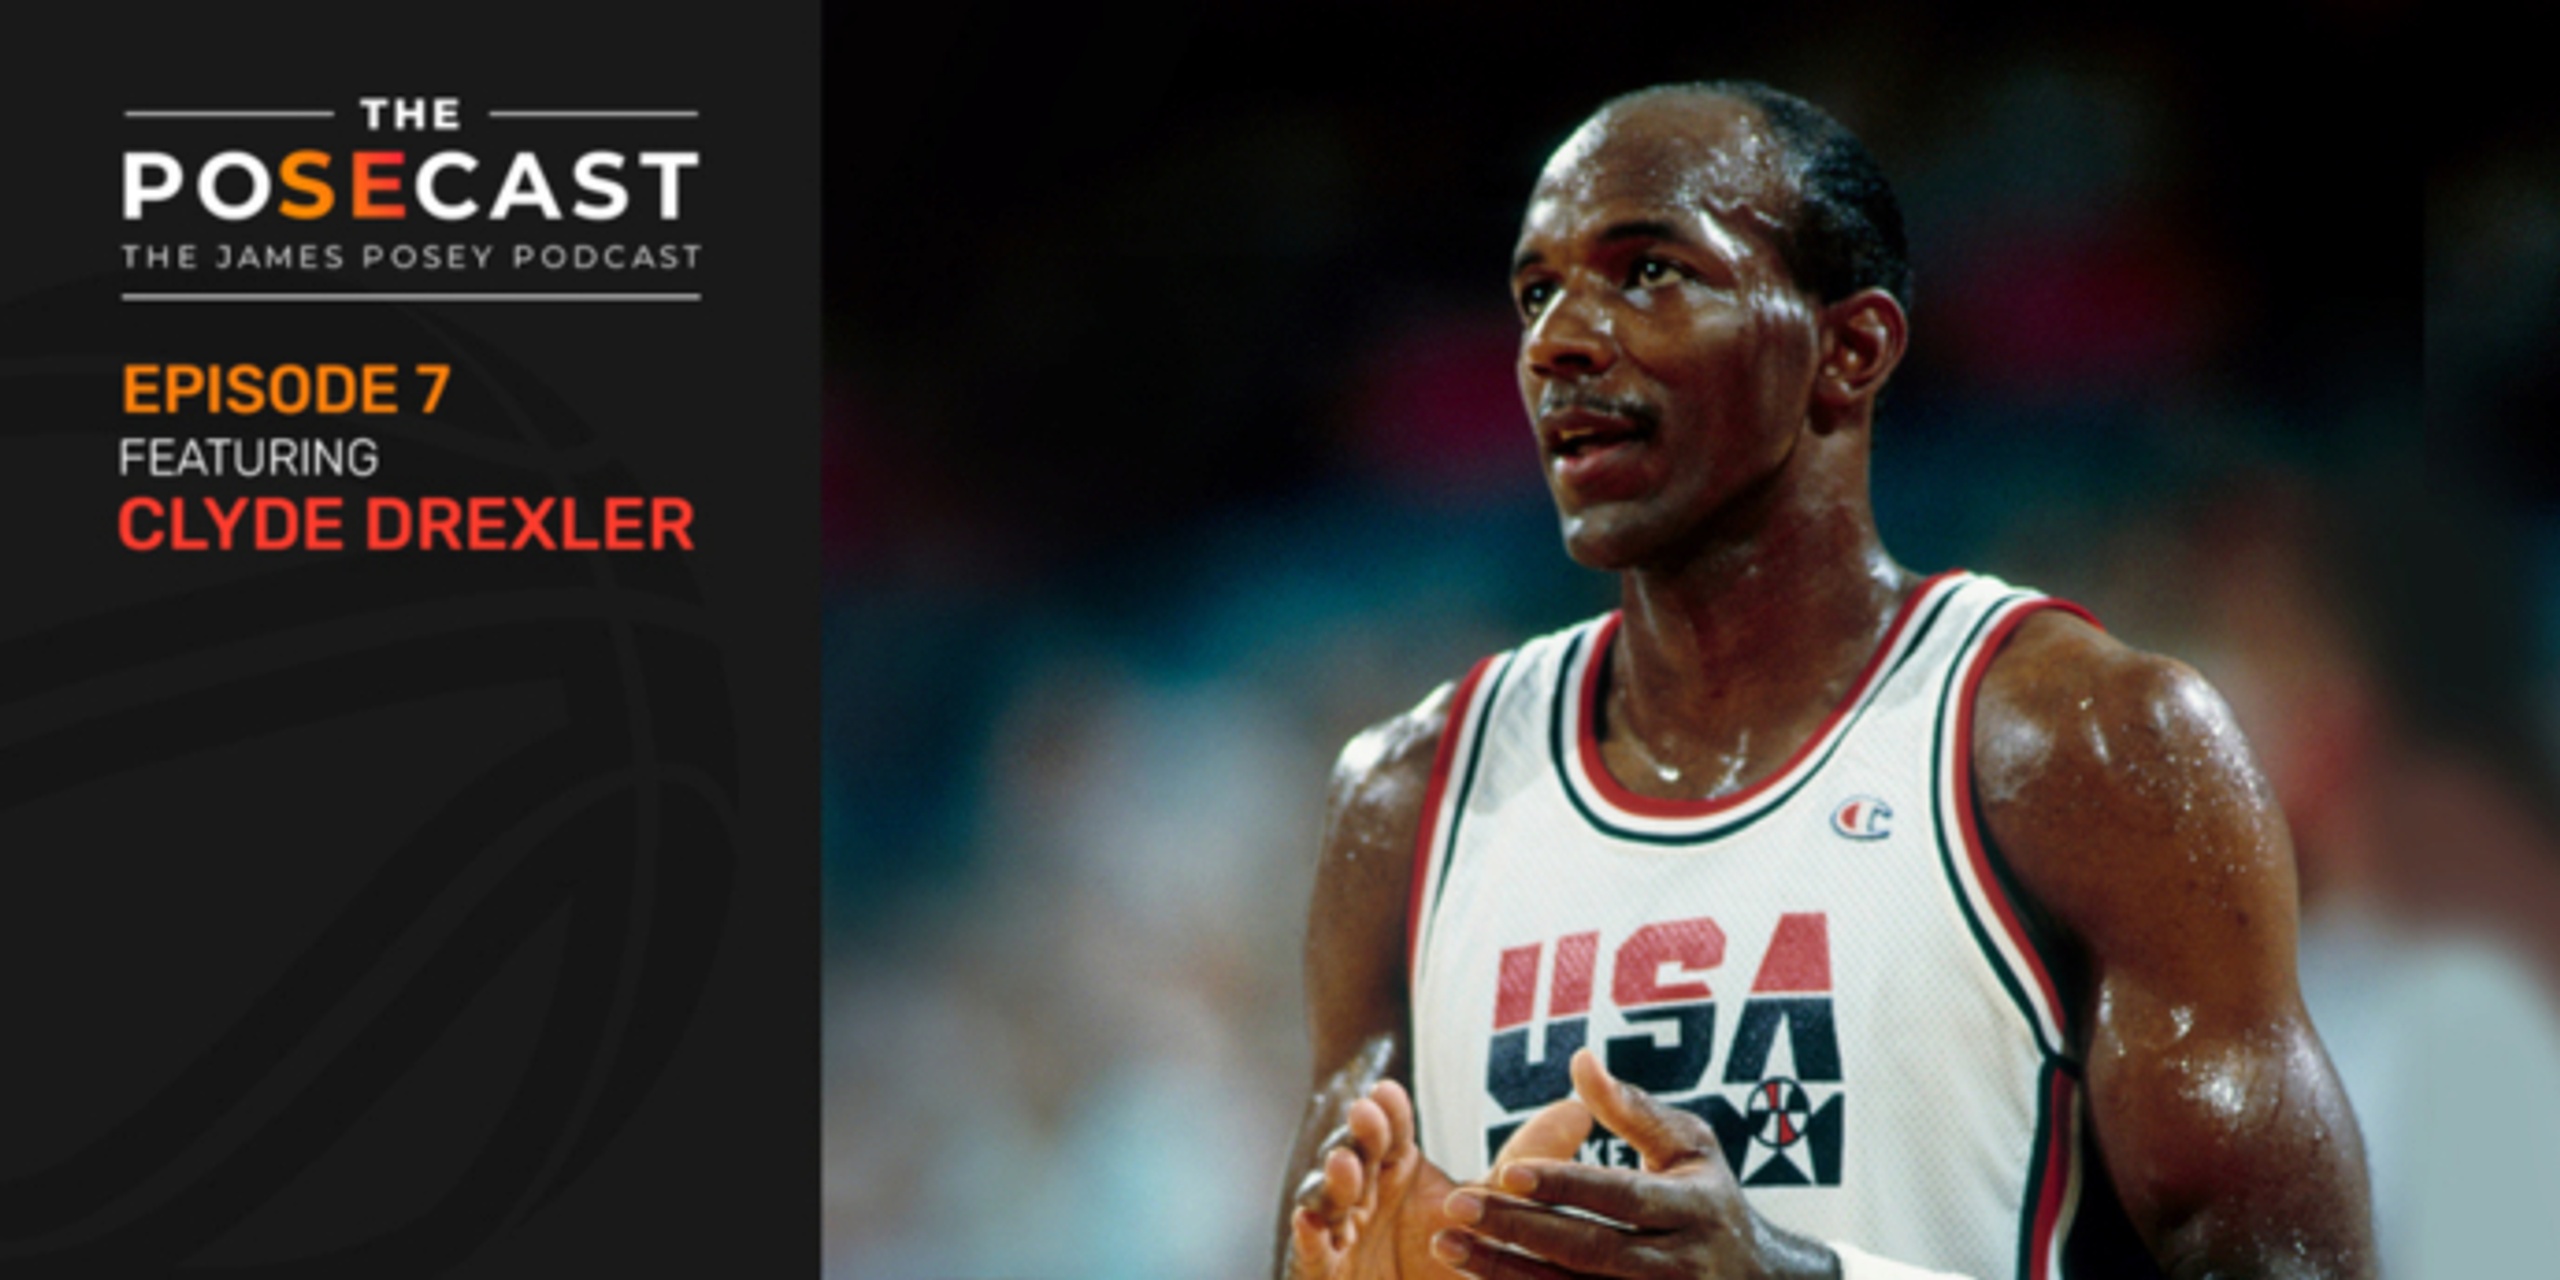 The Posecast: Clyde Drexler on '80s dunk contests, the Dream Team, more